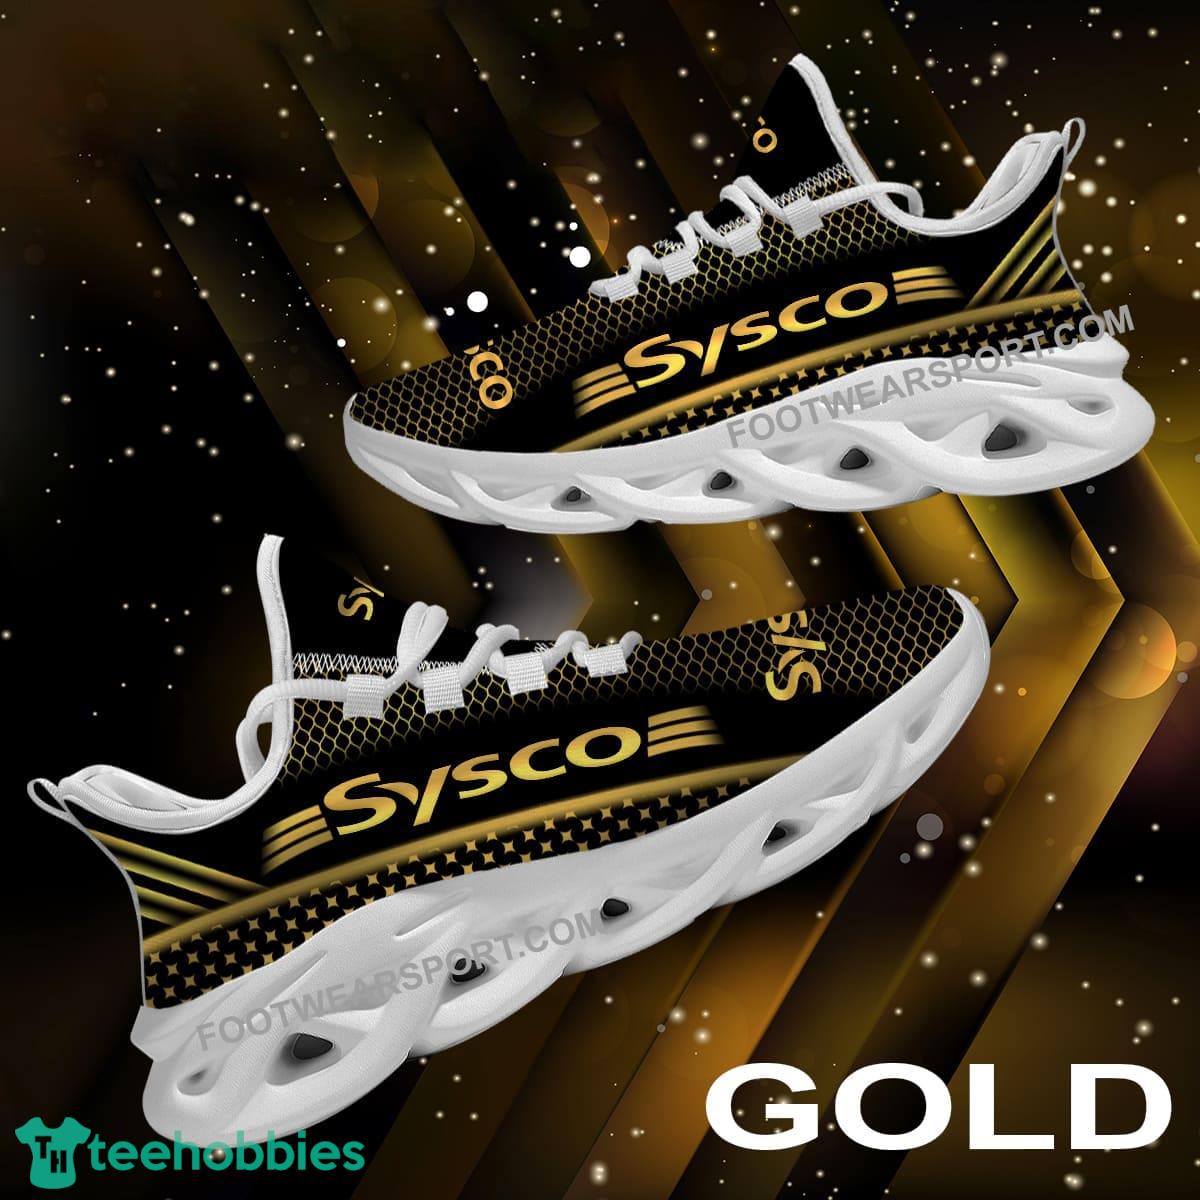 Sysco Max Soul Shoes Gold Sport Sneaker Elegance For Fans Gift - Sysco Max Soul Shoes Gold Sport Sneaker Elegance For Fans Gift